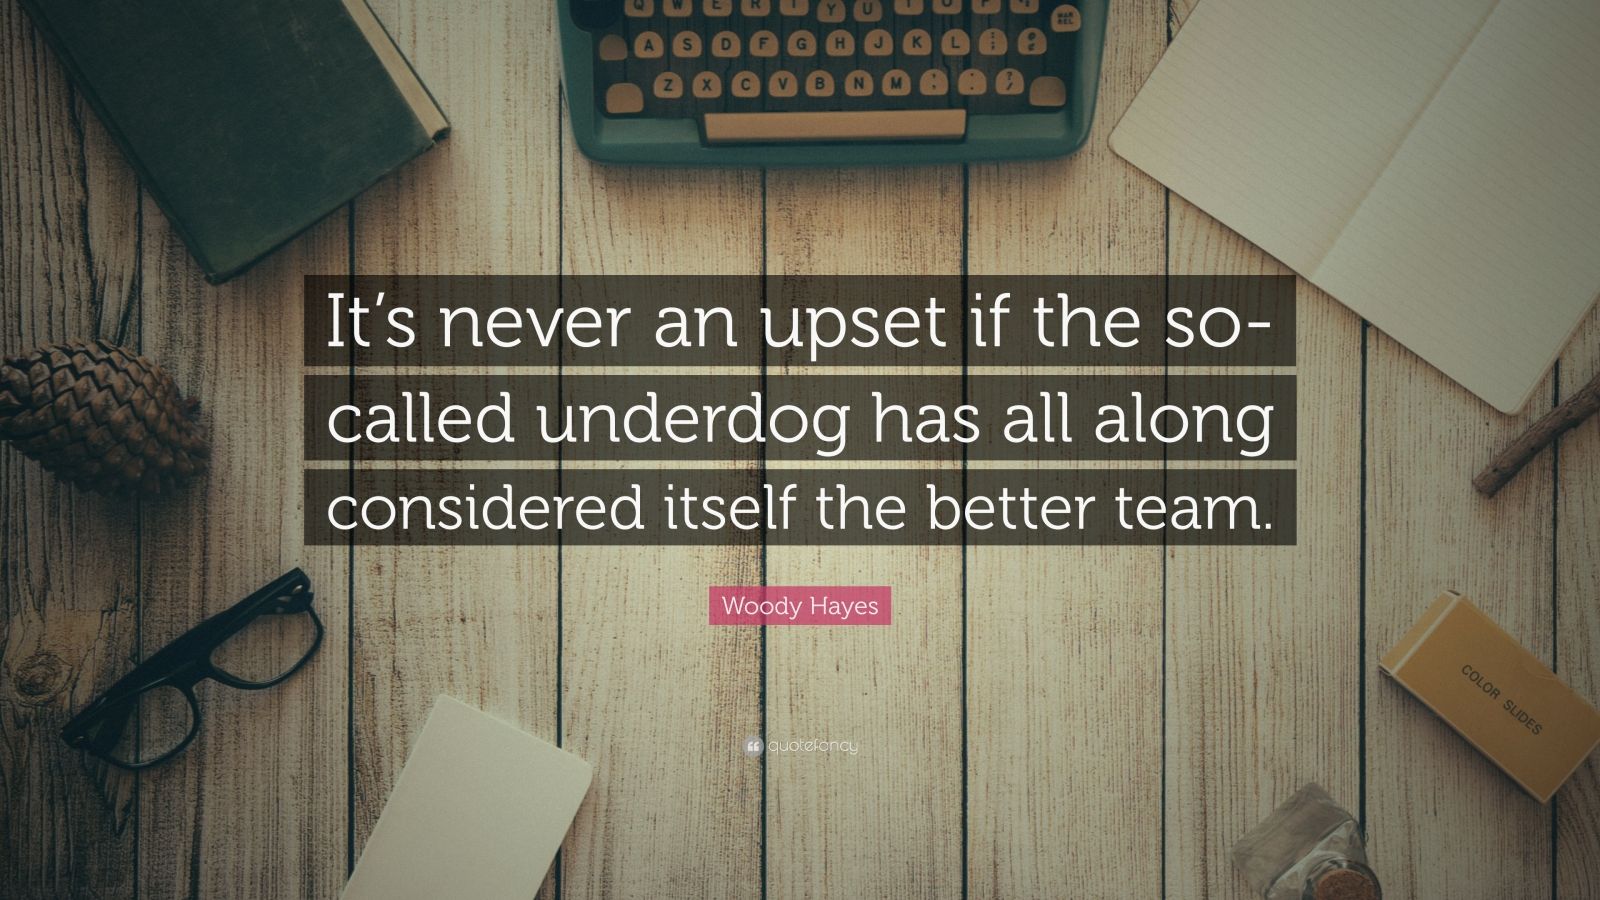 Woody Hayes Quote: “It’s never an upset if the so-called underdog has all along considered